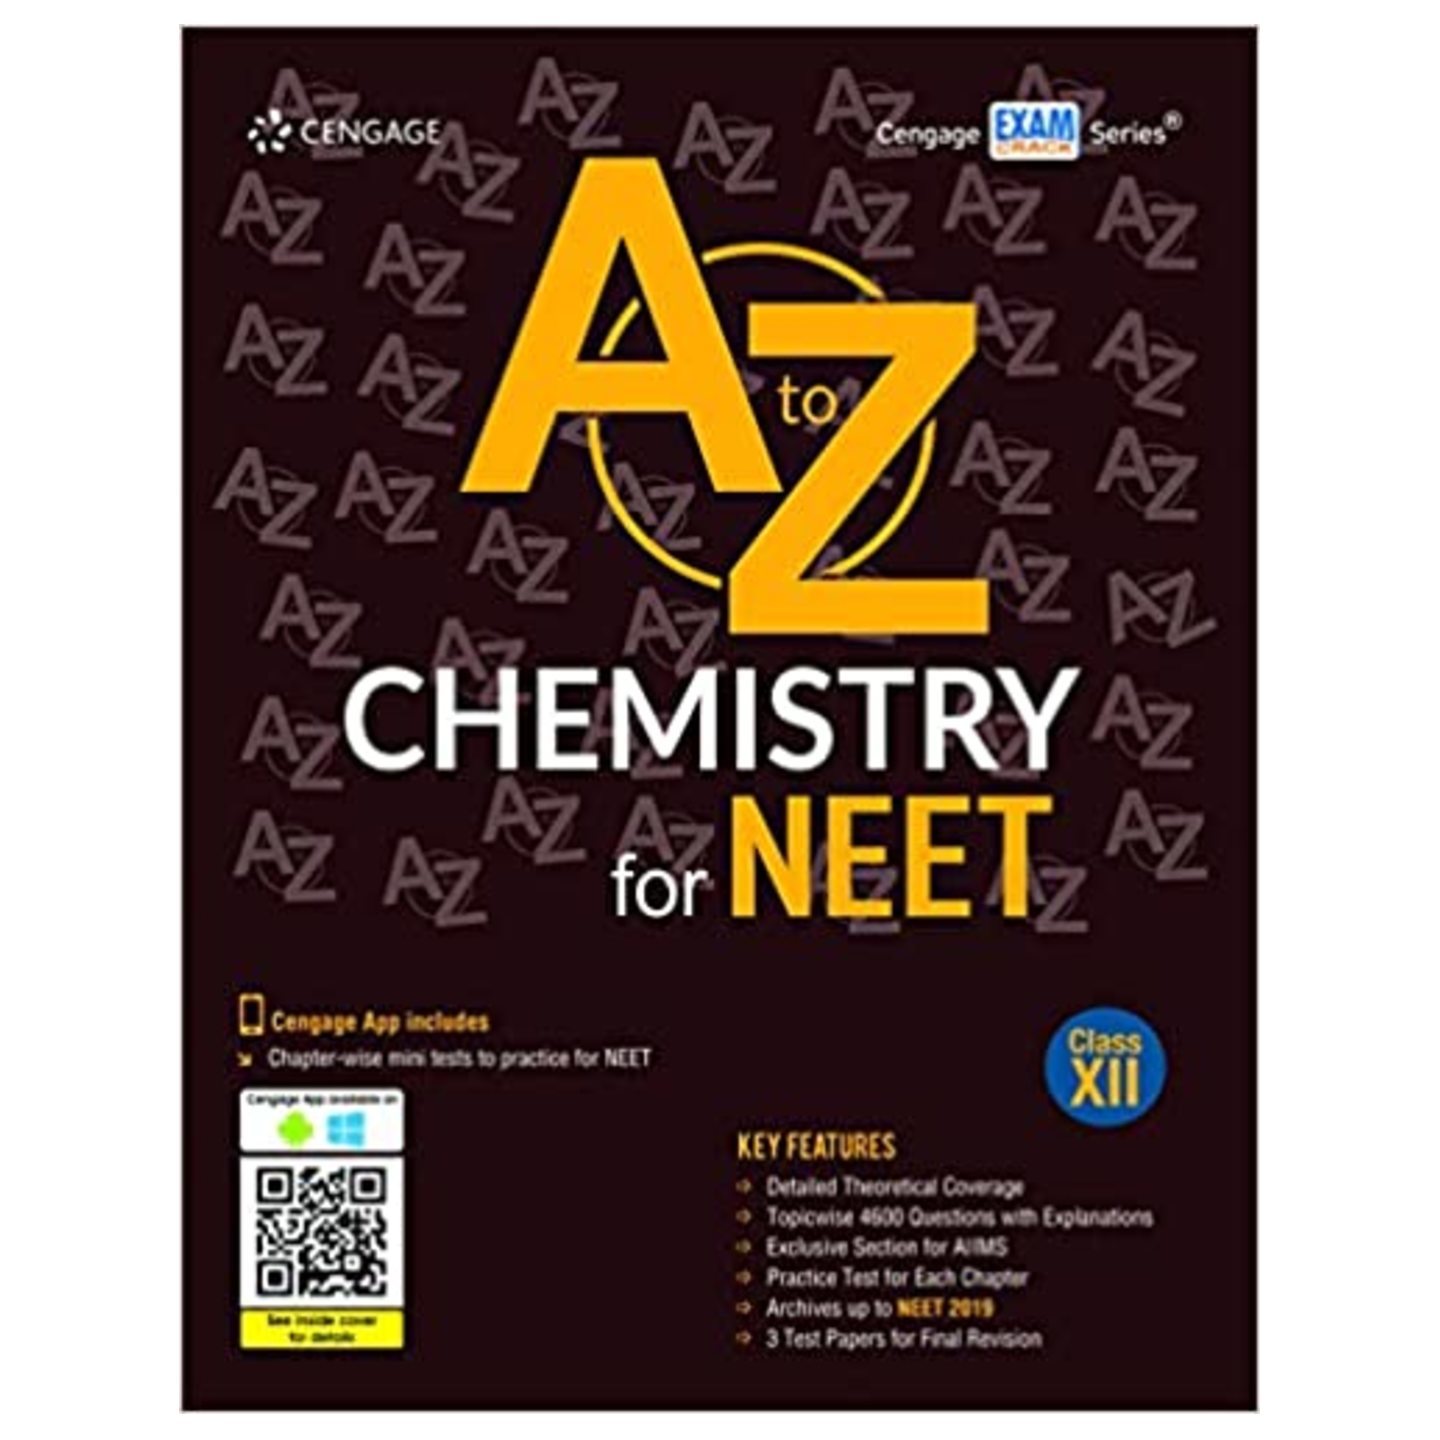 CENGAGE A to Z Chemistry for NEET Class XII